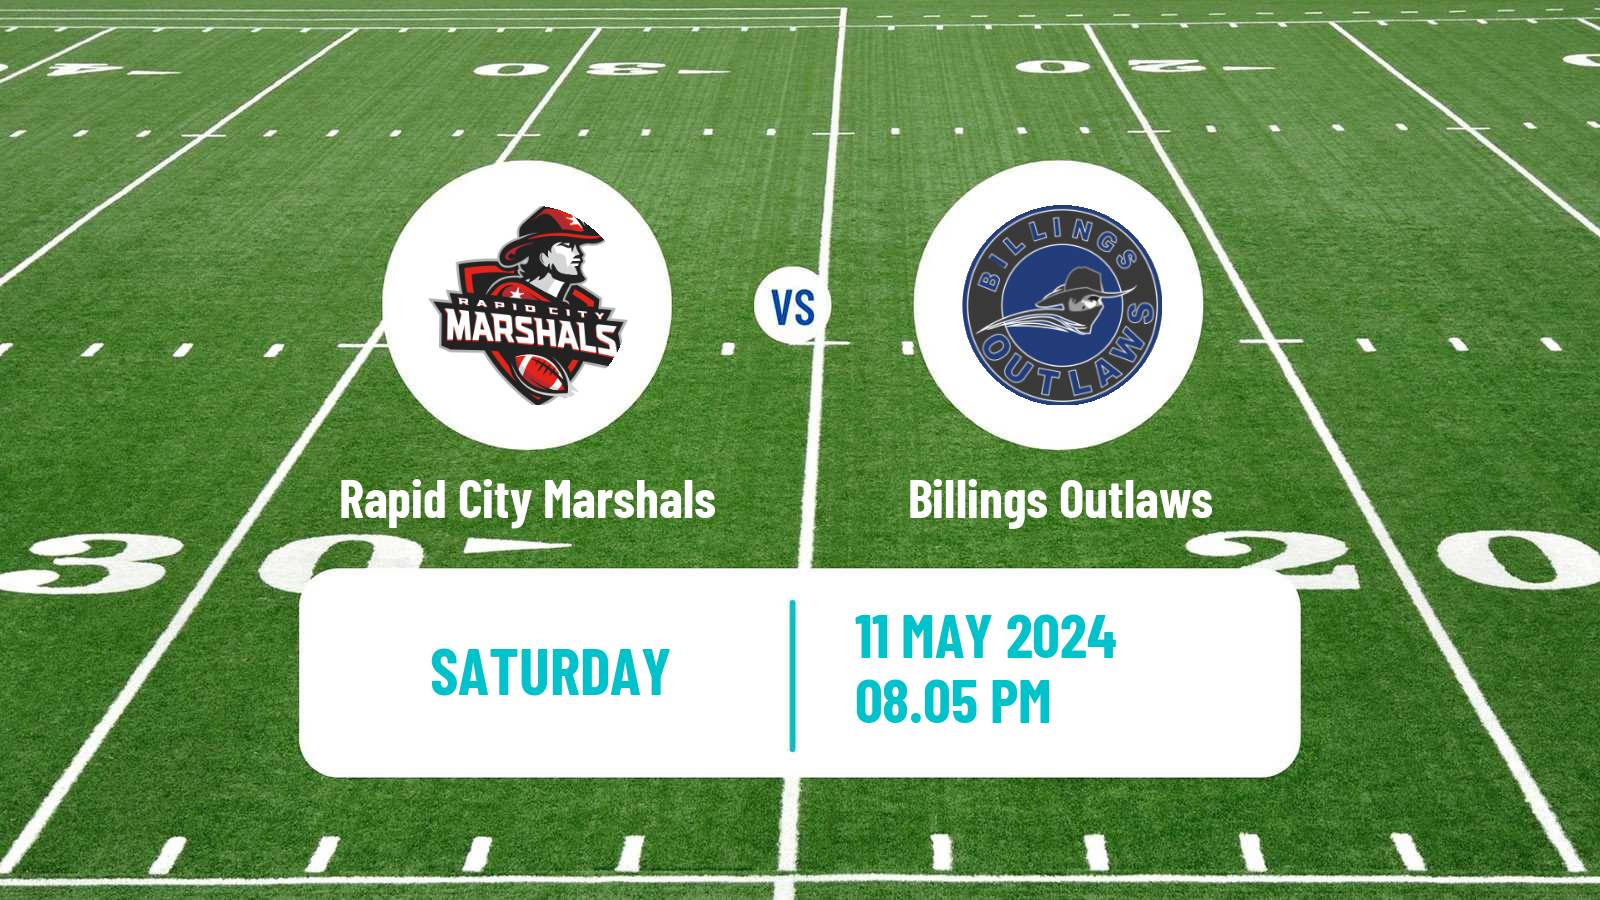 Arena football Arena Football League Rapid City Marshals - Billings Outlaws